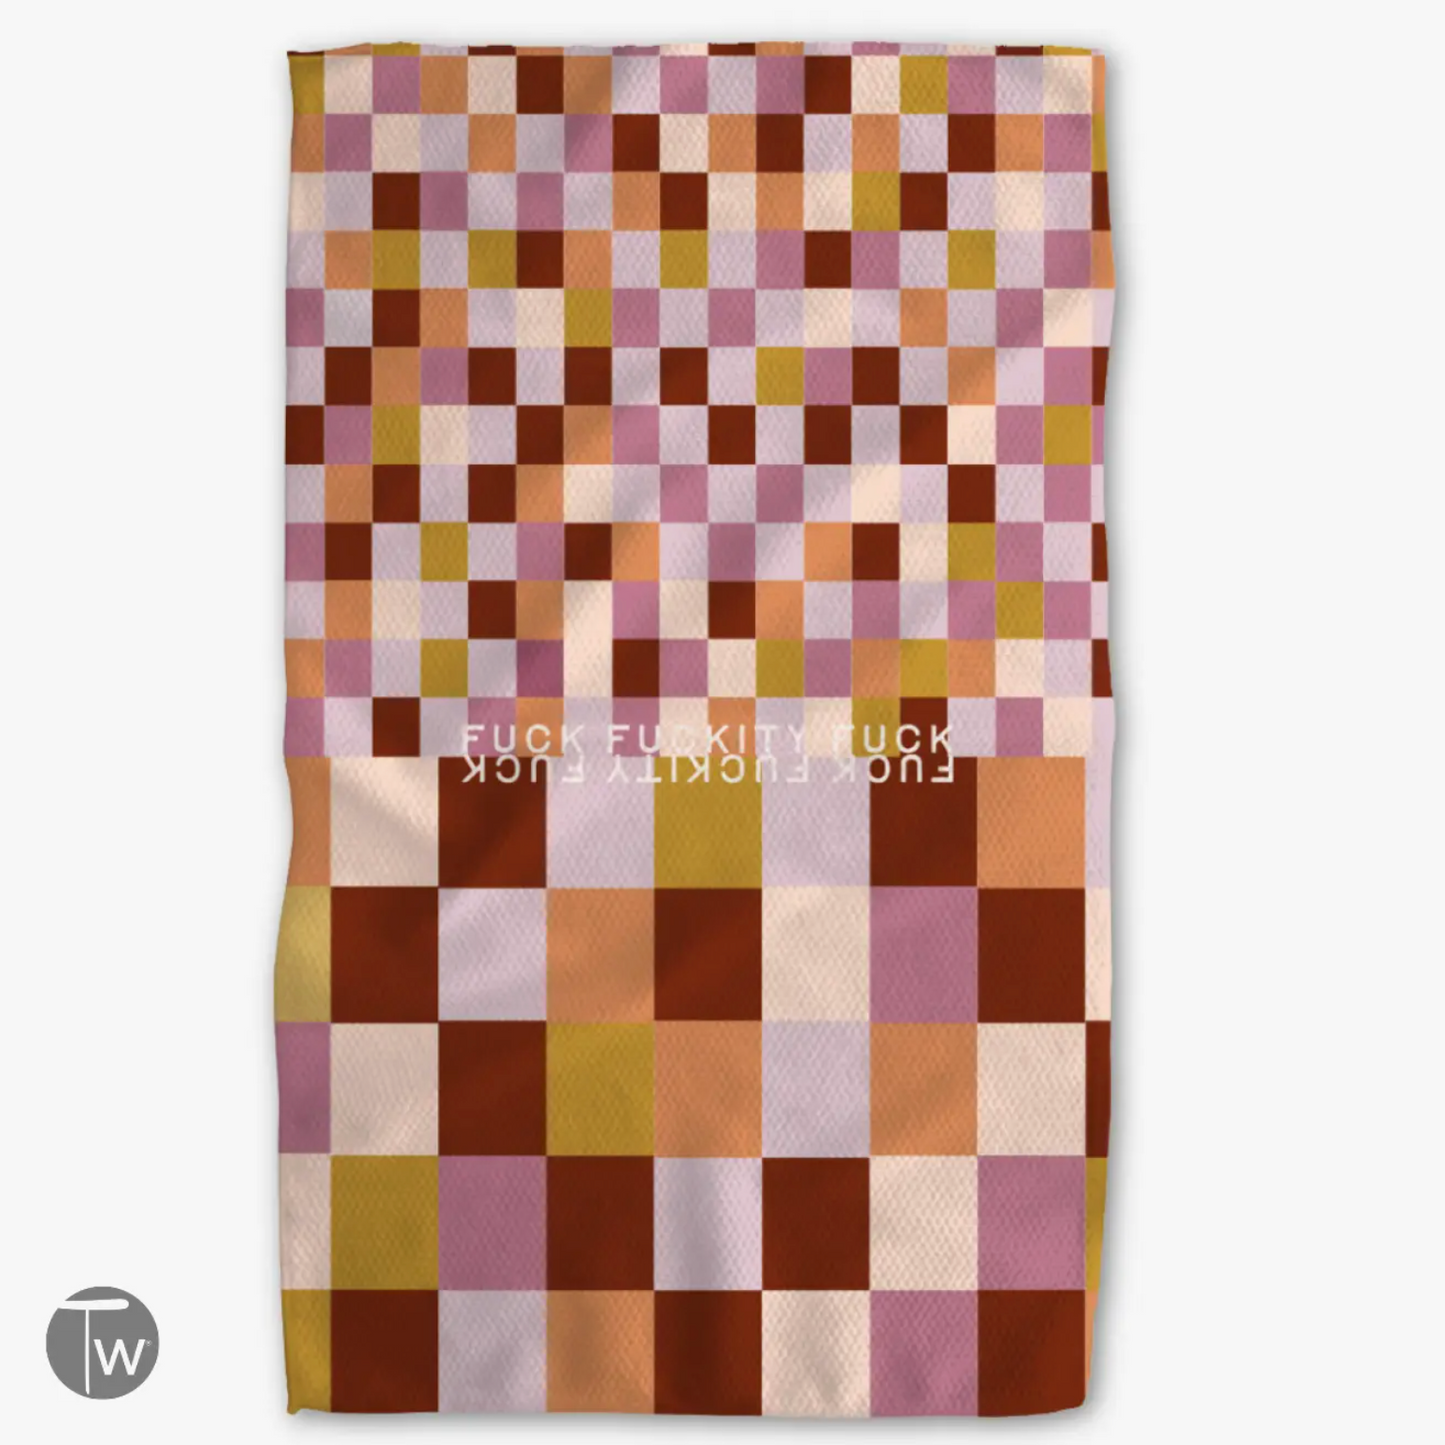 F*ck F*ckity F*ck Checkers Lilac Kitchen Towel